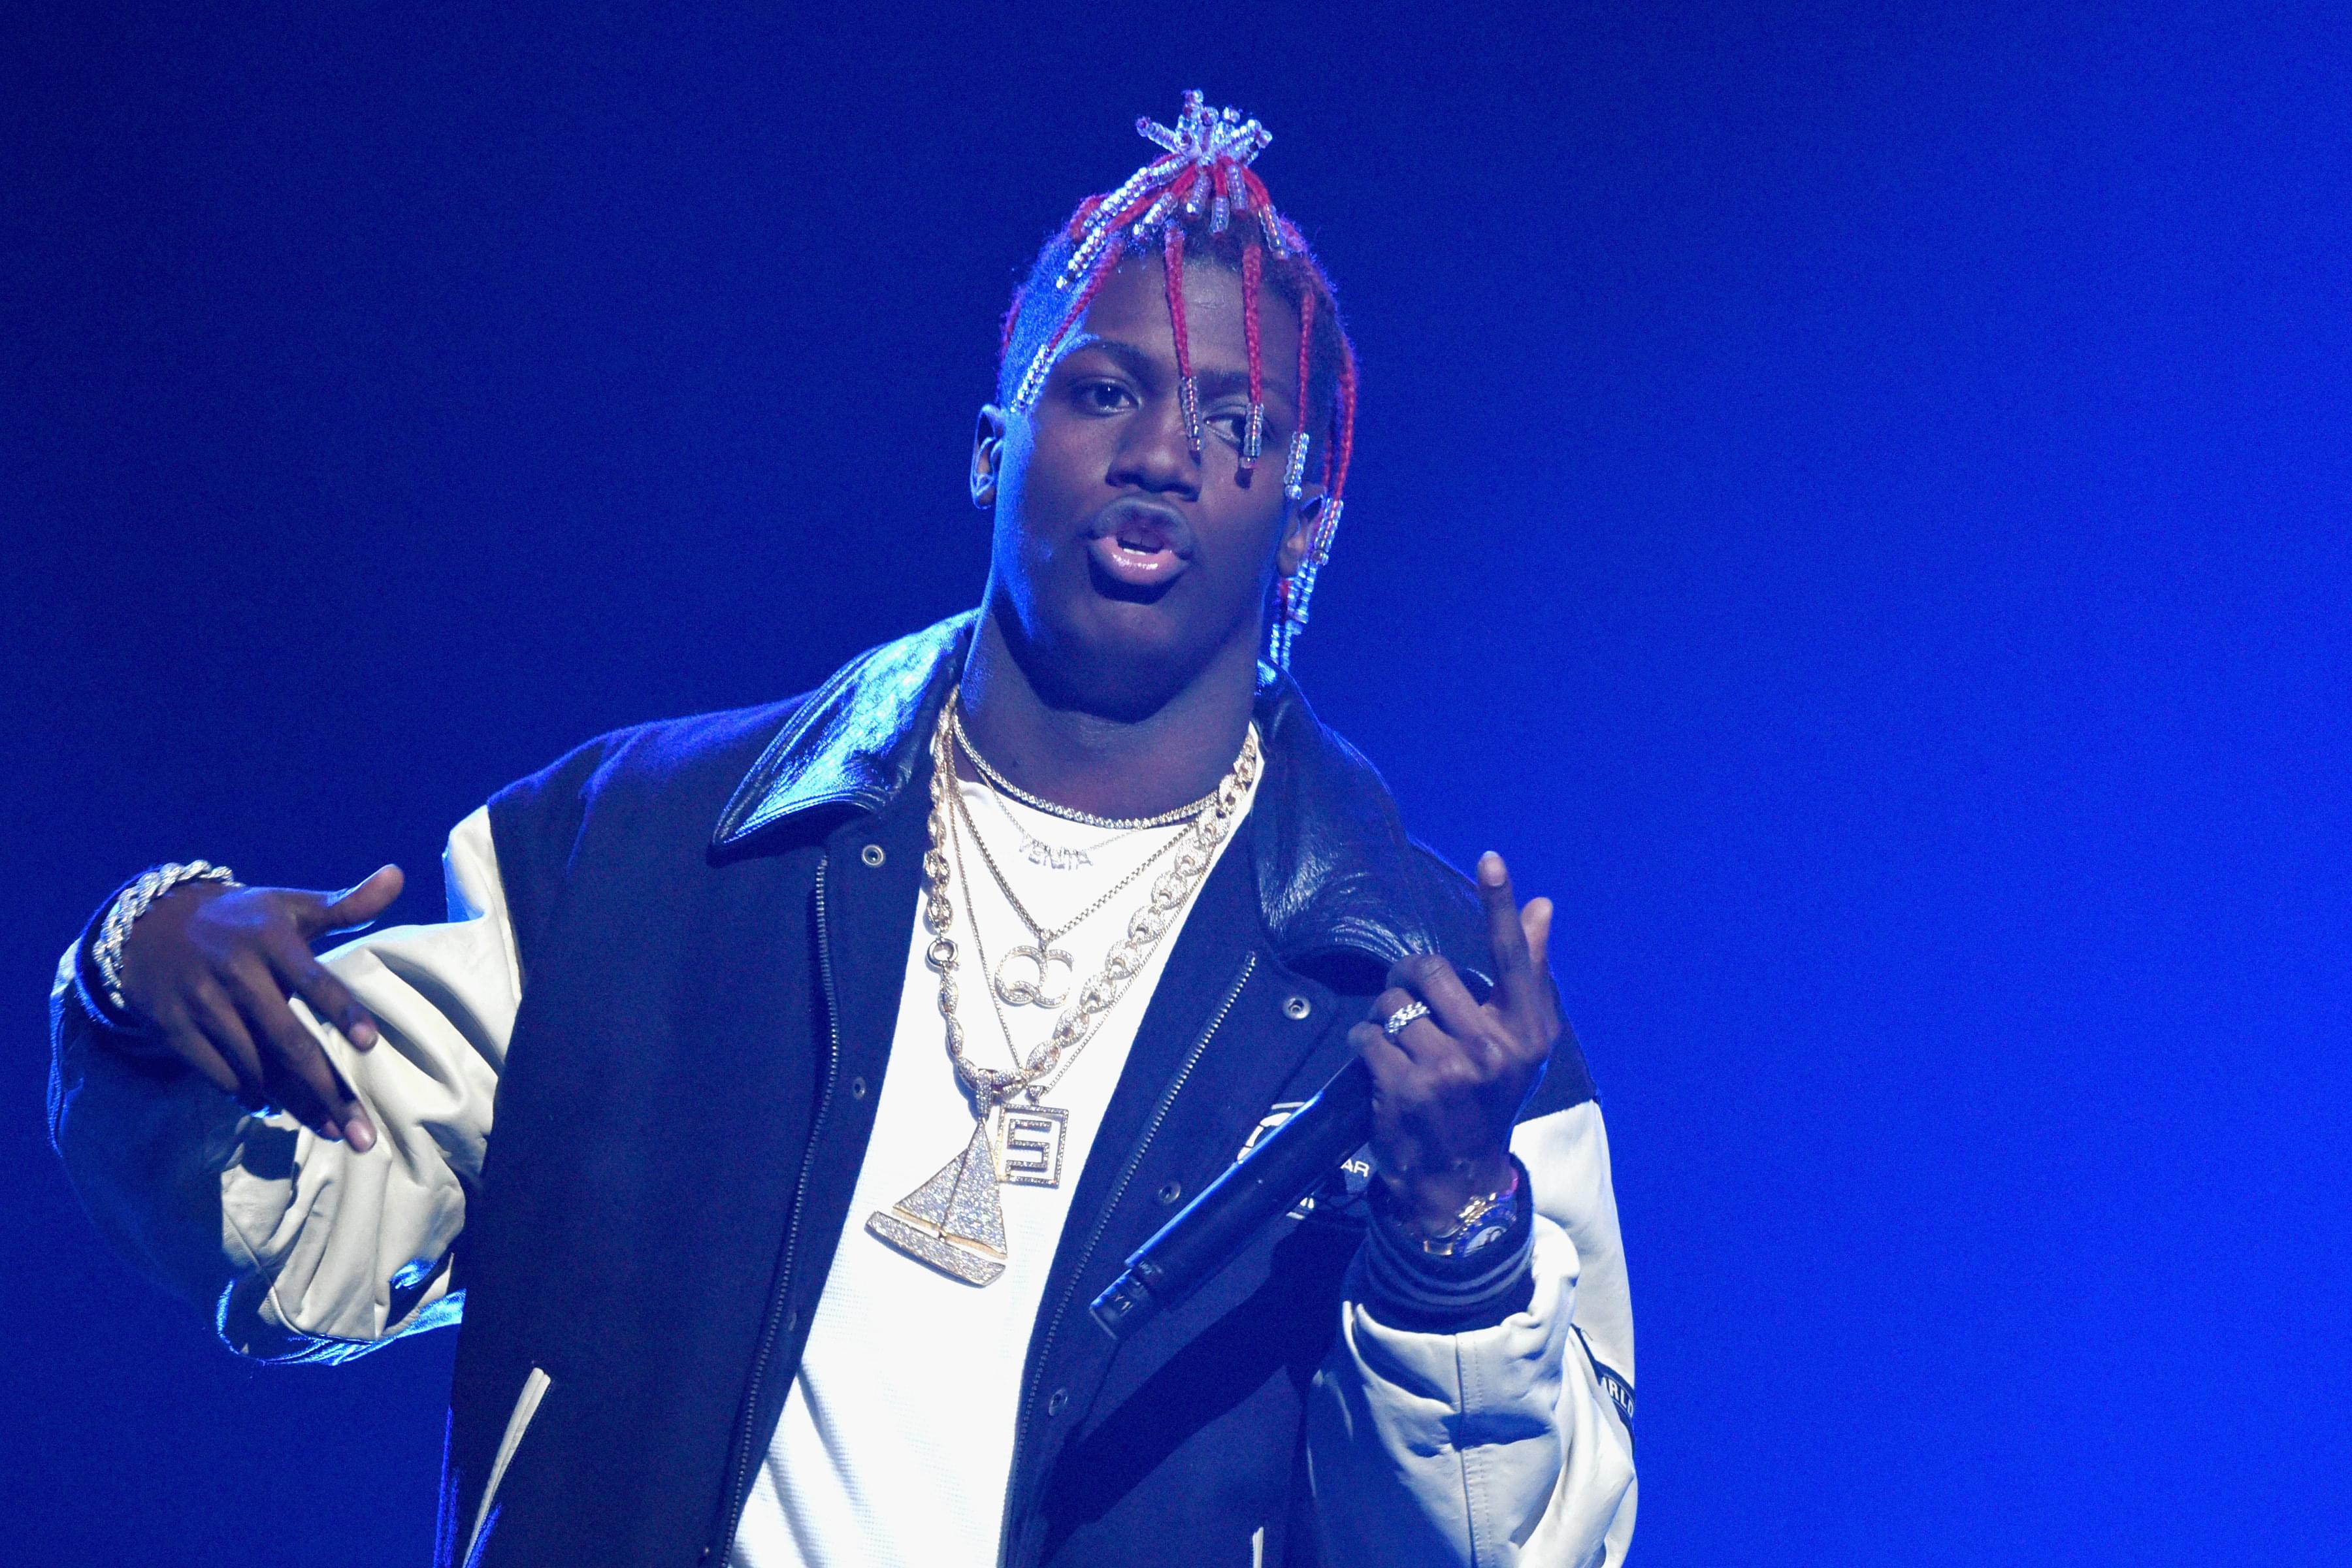 Cali Christmas Artist Lil Yachty Discusses The Relationship Between Old School and New School Hip Hop